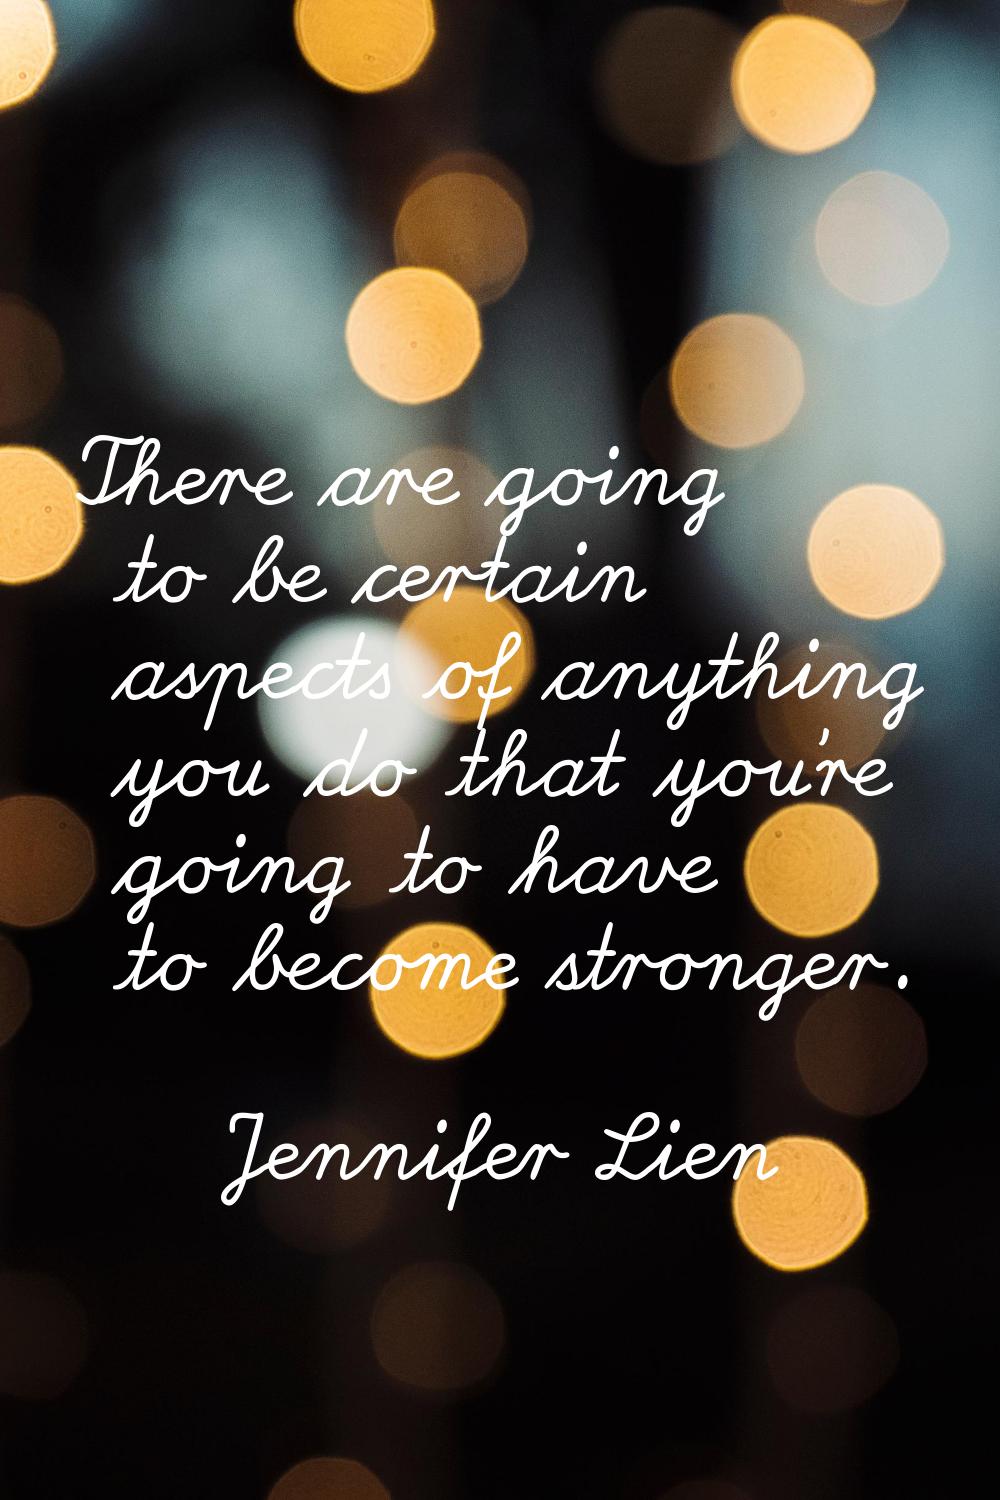 There are going to be certain aspects of anything you do that you're going to have to become strong